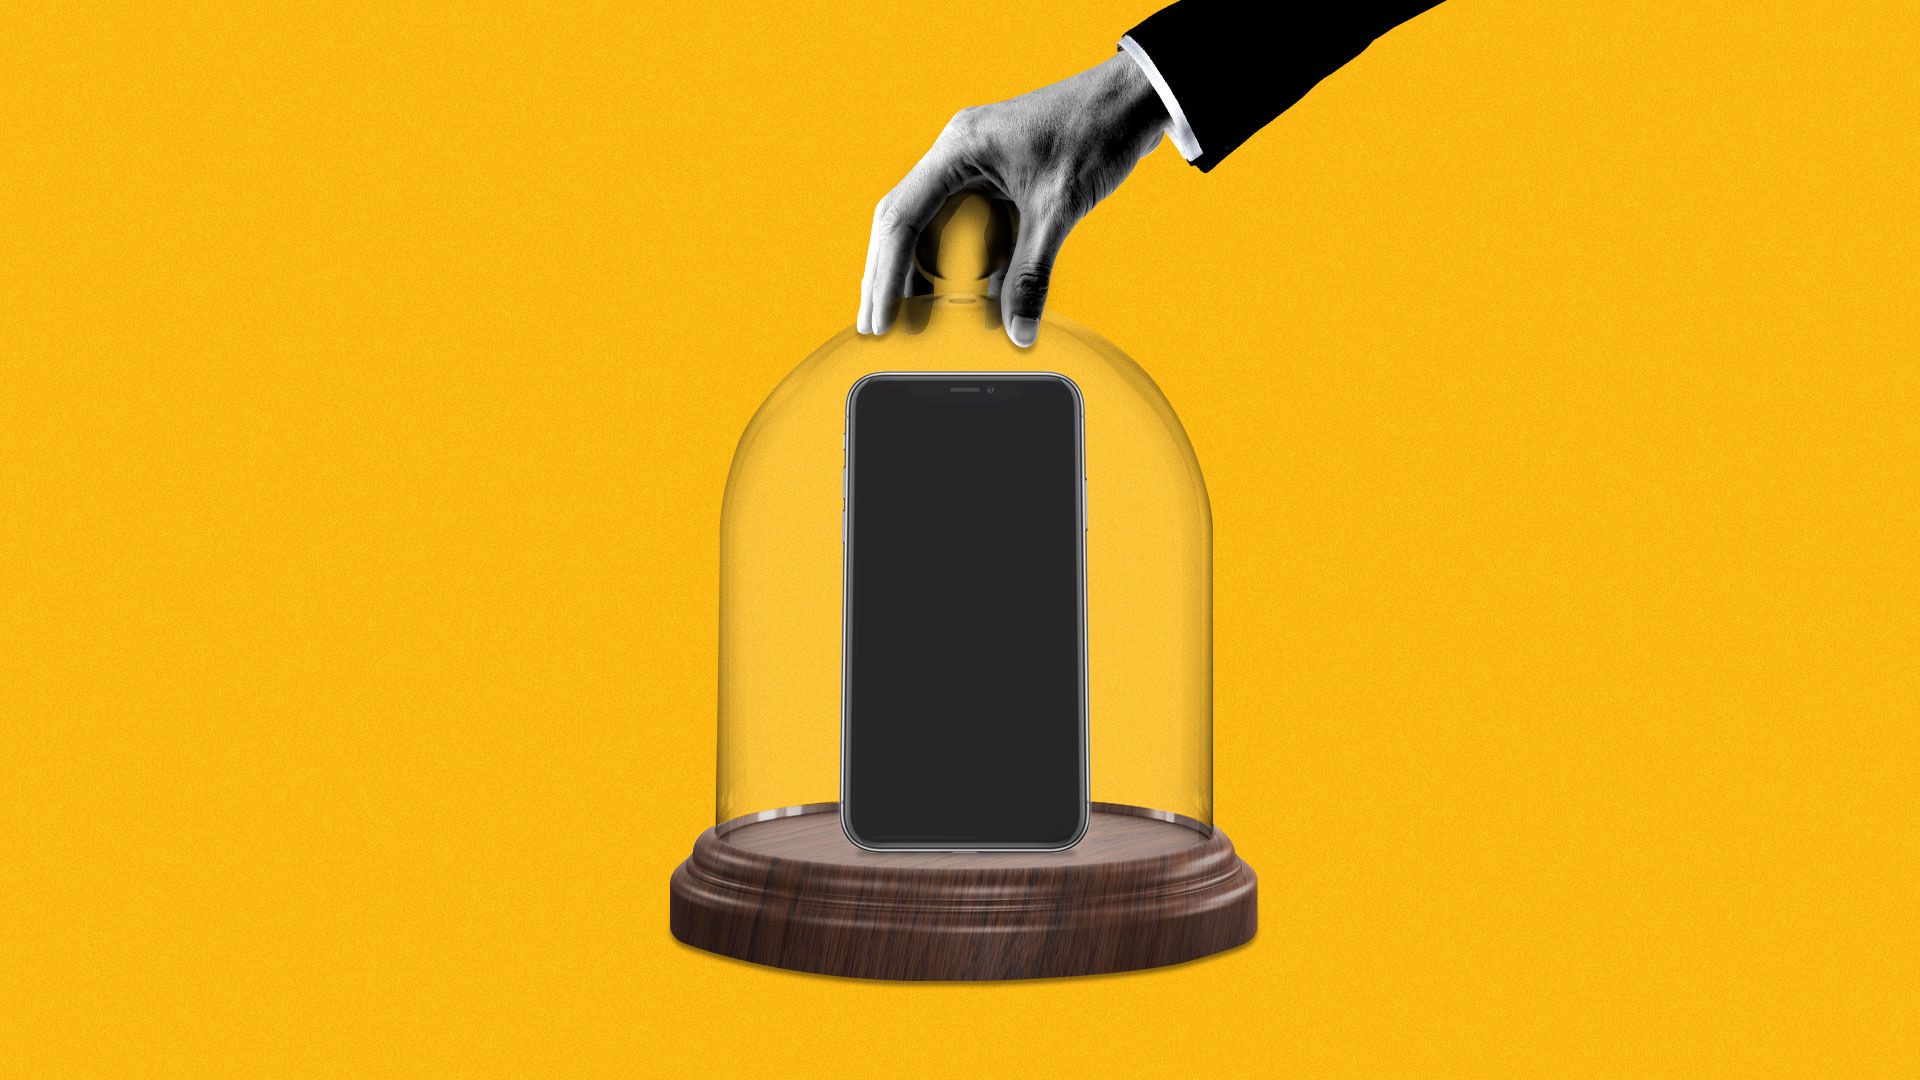 Illustration of suited hand holding glass cloche protecting a phone.